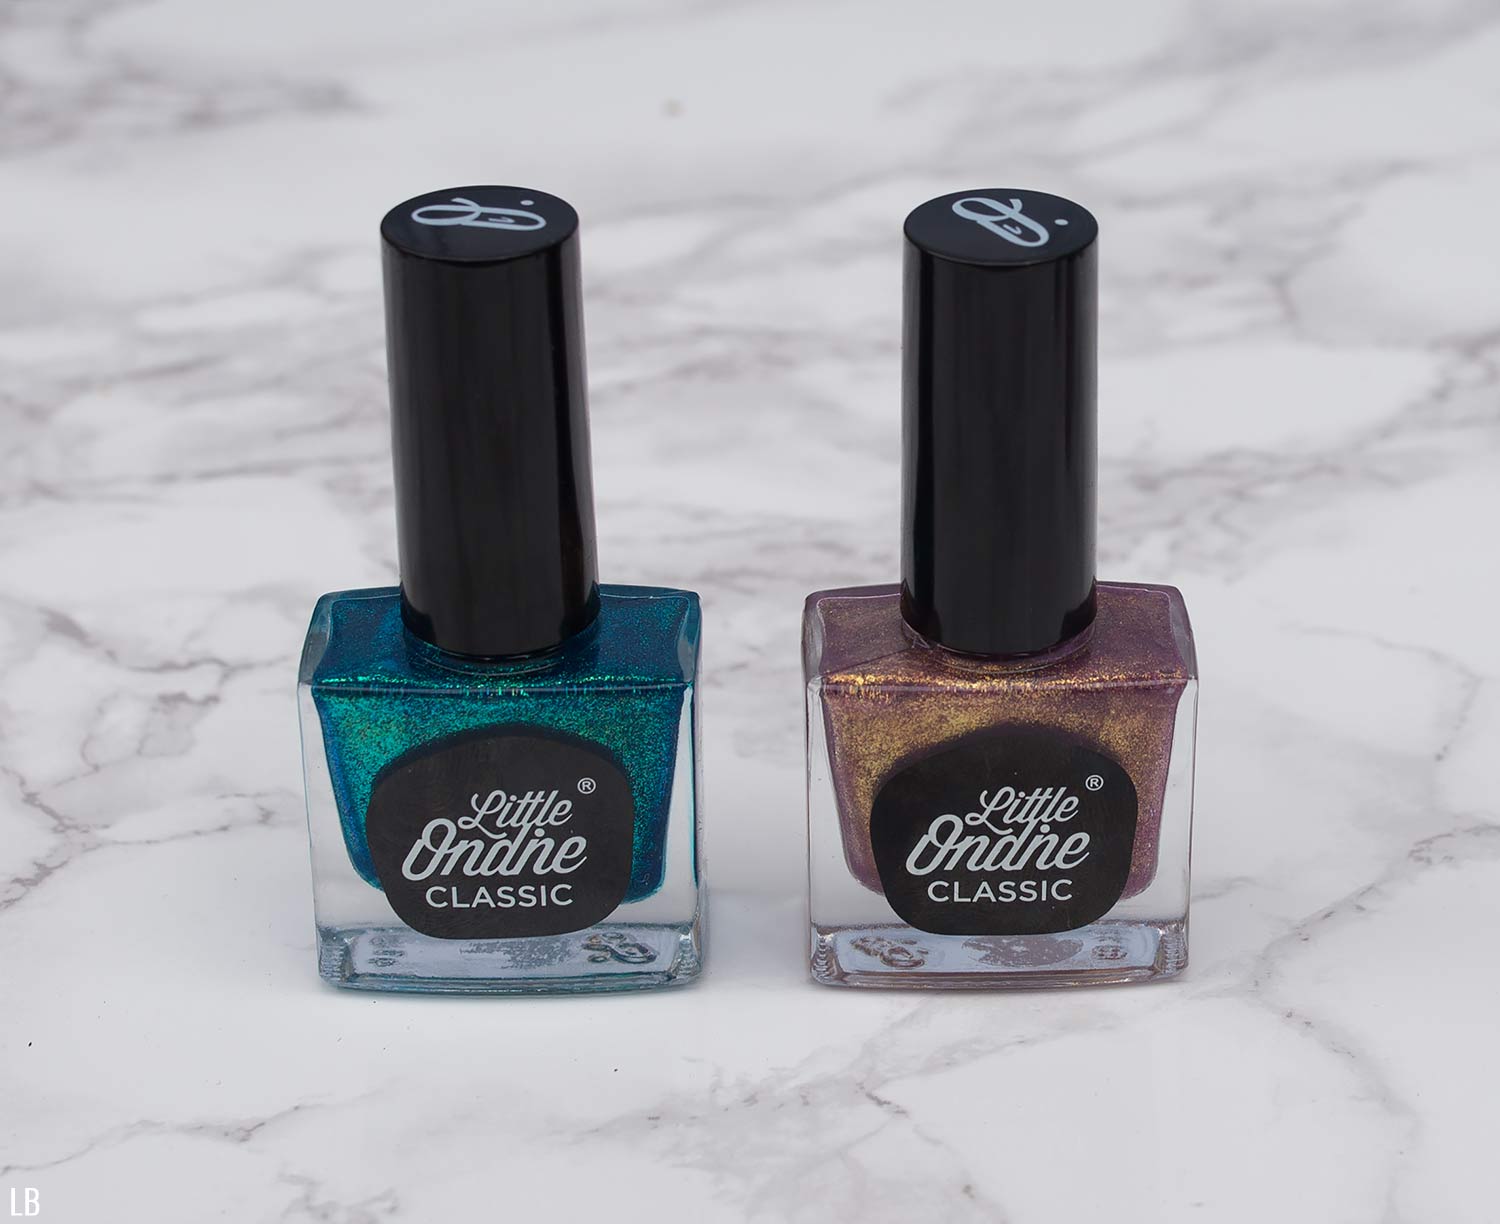 Odourless Nail Polish By Little Ondine Review – It Has No Smell! -  Raindrops of Sapphire